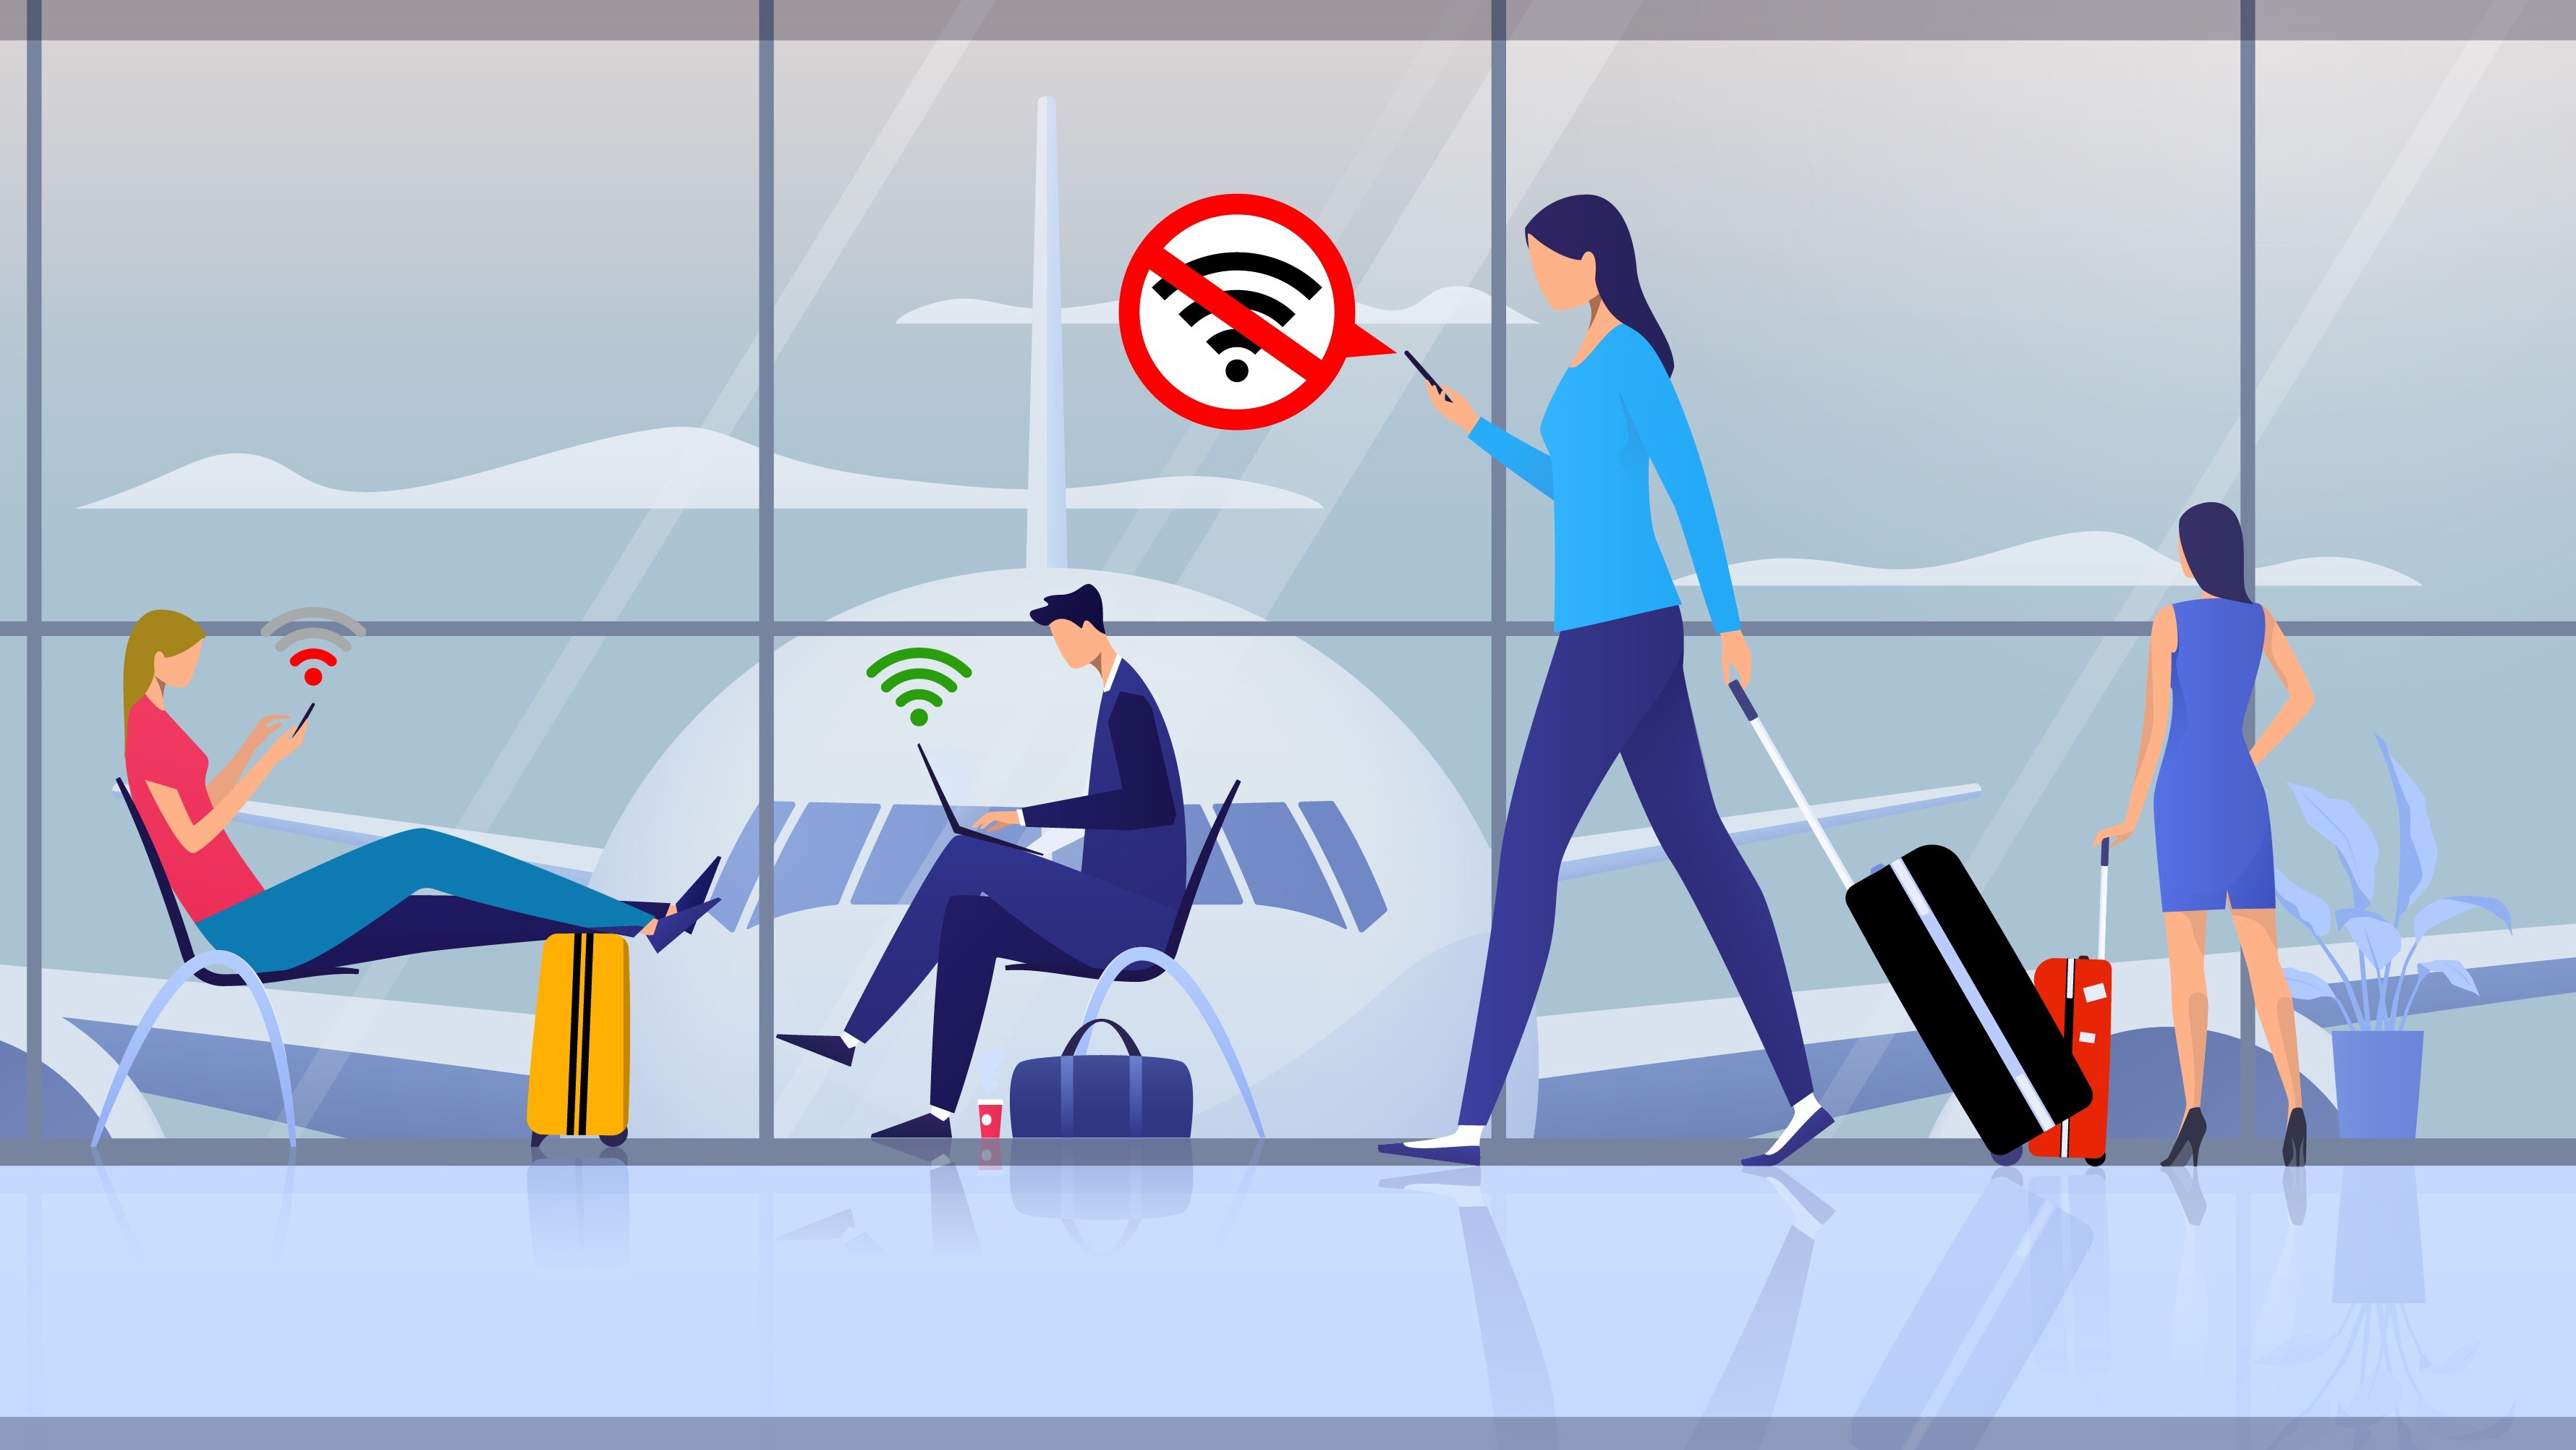 Mobile internet problems can be avoided by business travellers thanks to the use of portable Cloud SIM technology, which offers flexible mobile data connectivity in different countries around the world.